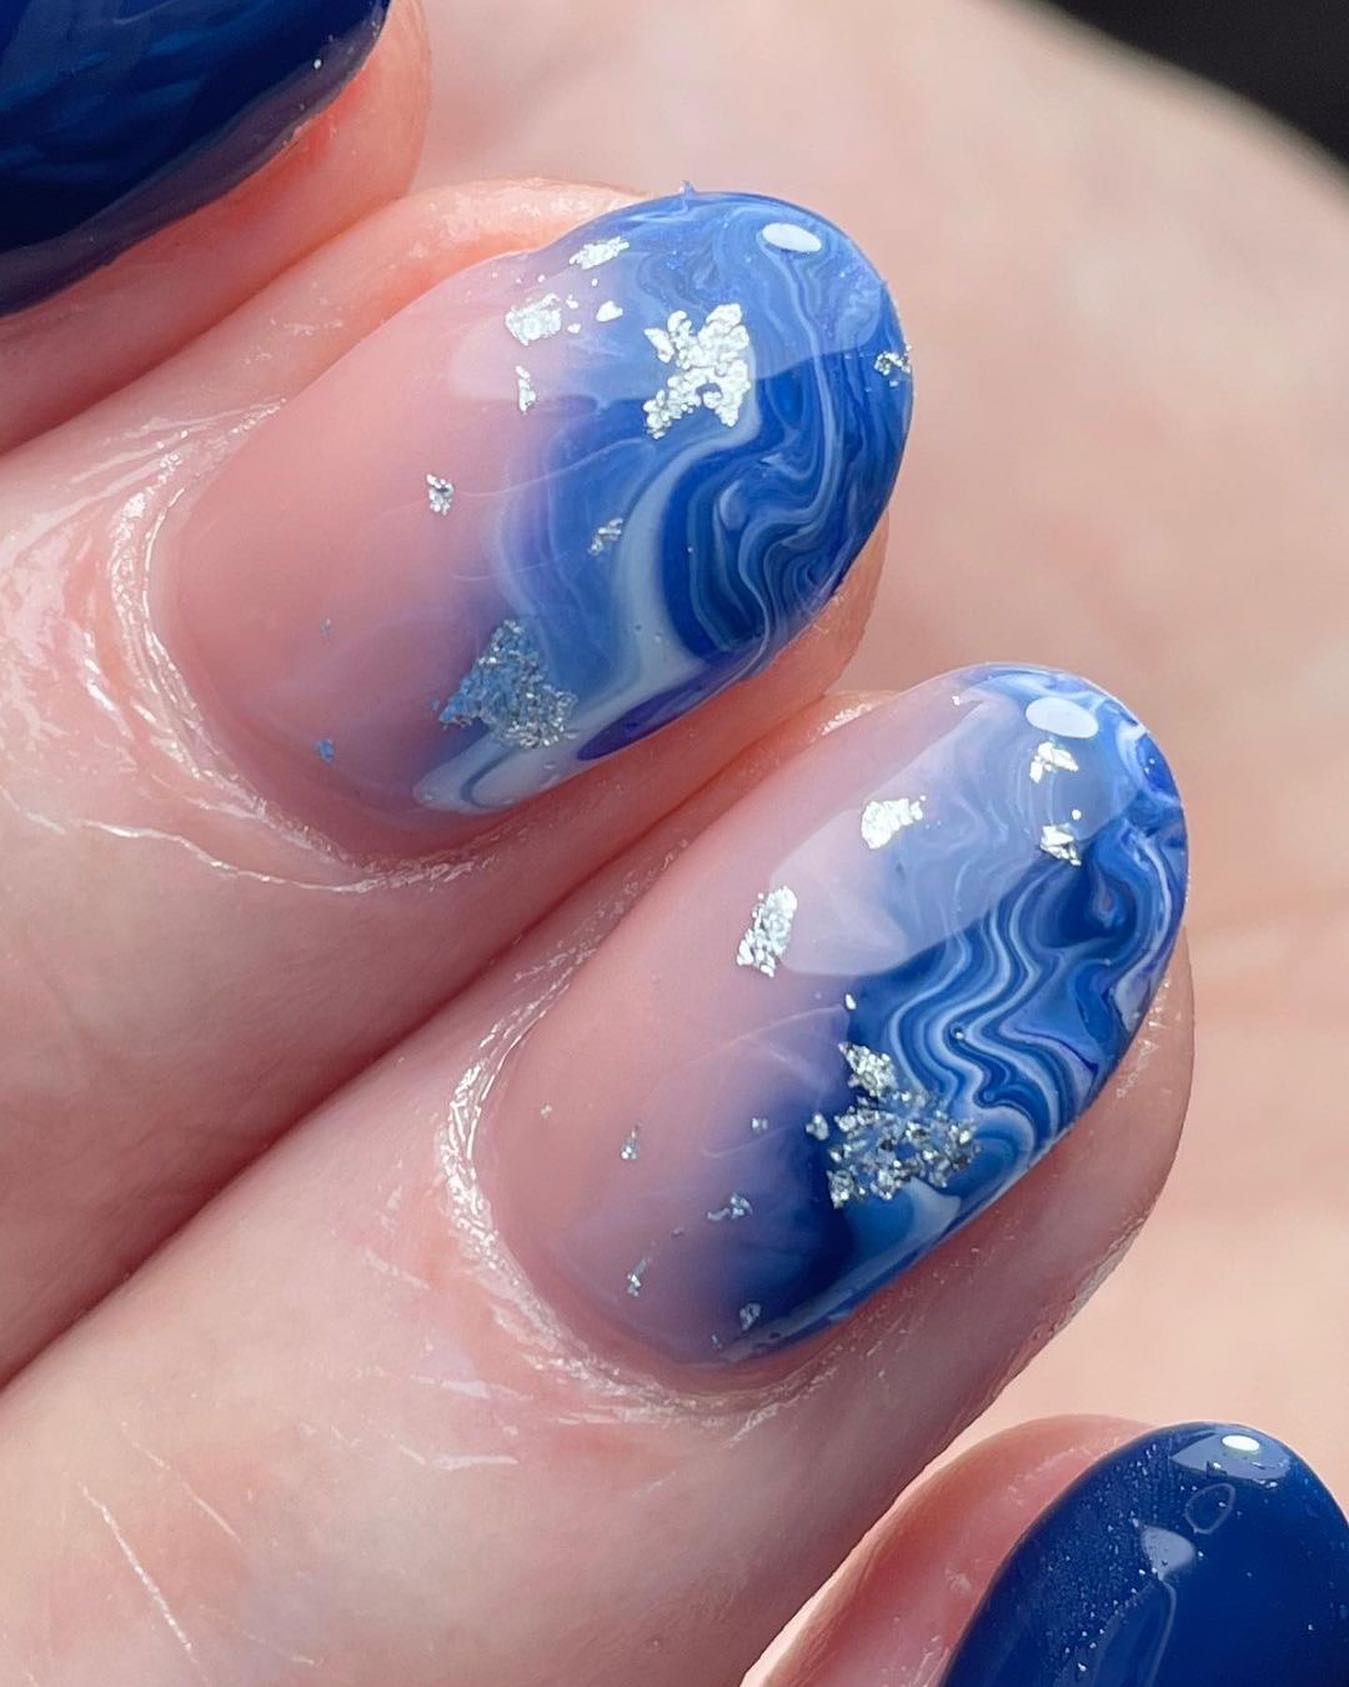 Marble blue nails are the perfect way to elevate your look this season. The marble effect is so popular right now, and it looks amazing on different skin tones. Let's have marble nail art for your oval accent nails to rock!